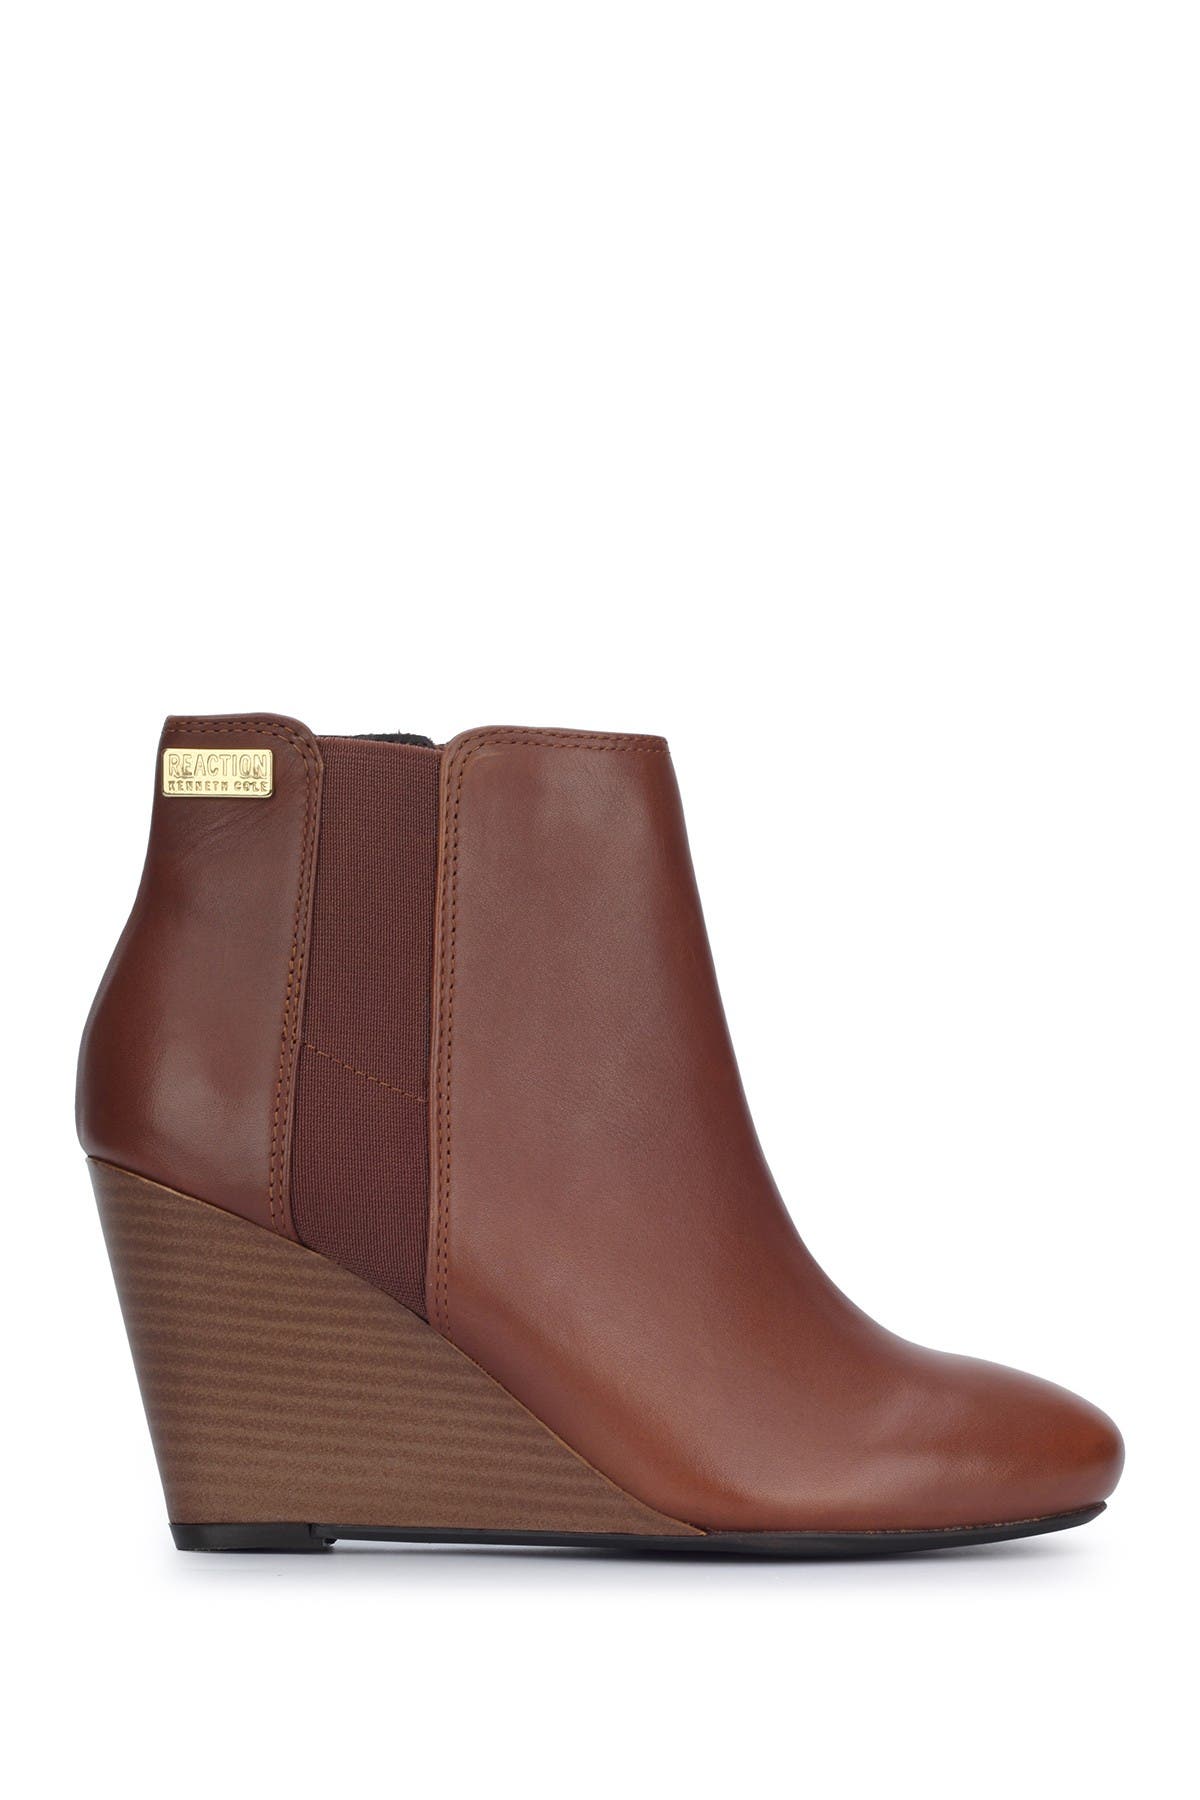 Kenneth Cole Reaction | Marcy Wedge 